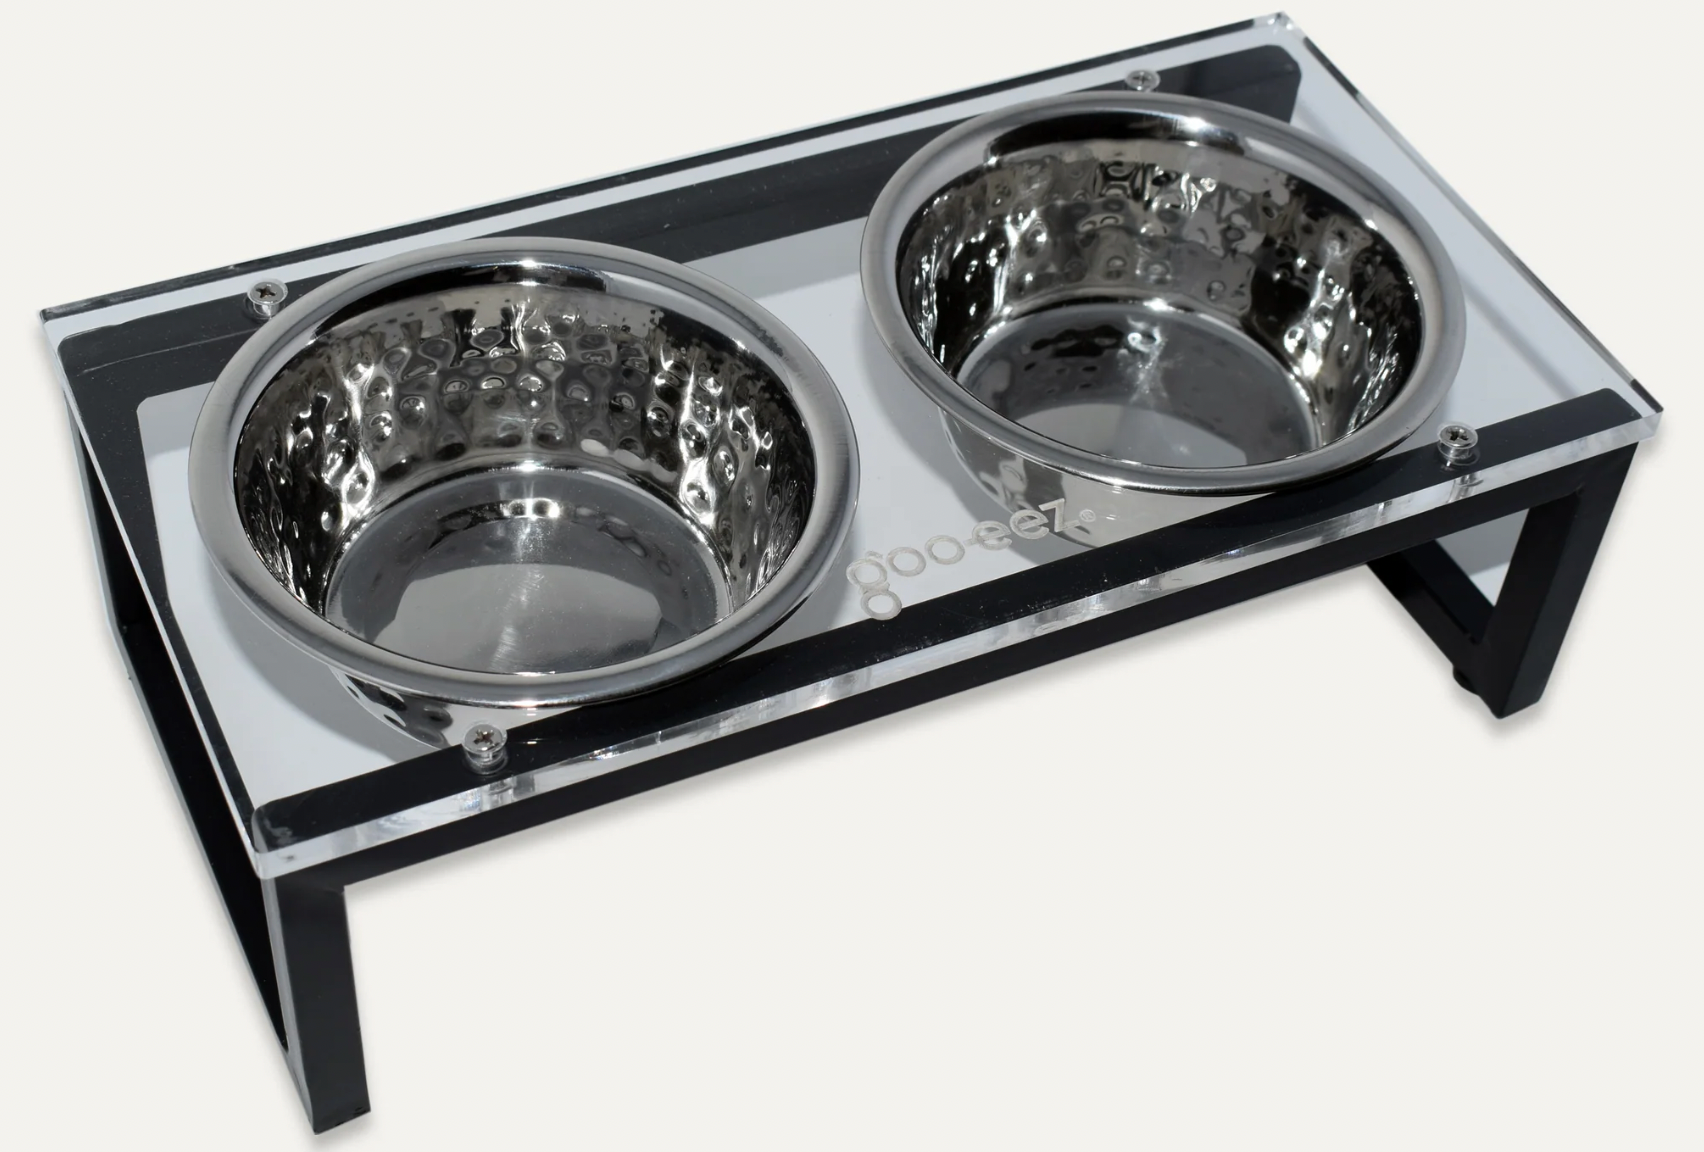 Goo-Eez Acrylic & Iron Double Feeder with Hammered Stainless Steel Bowls